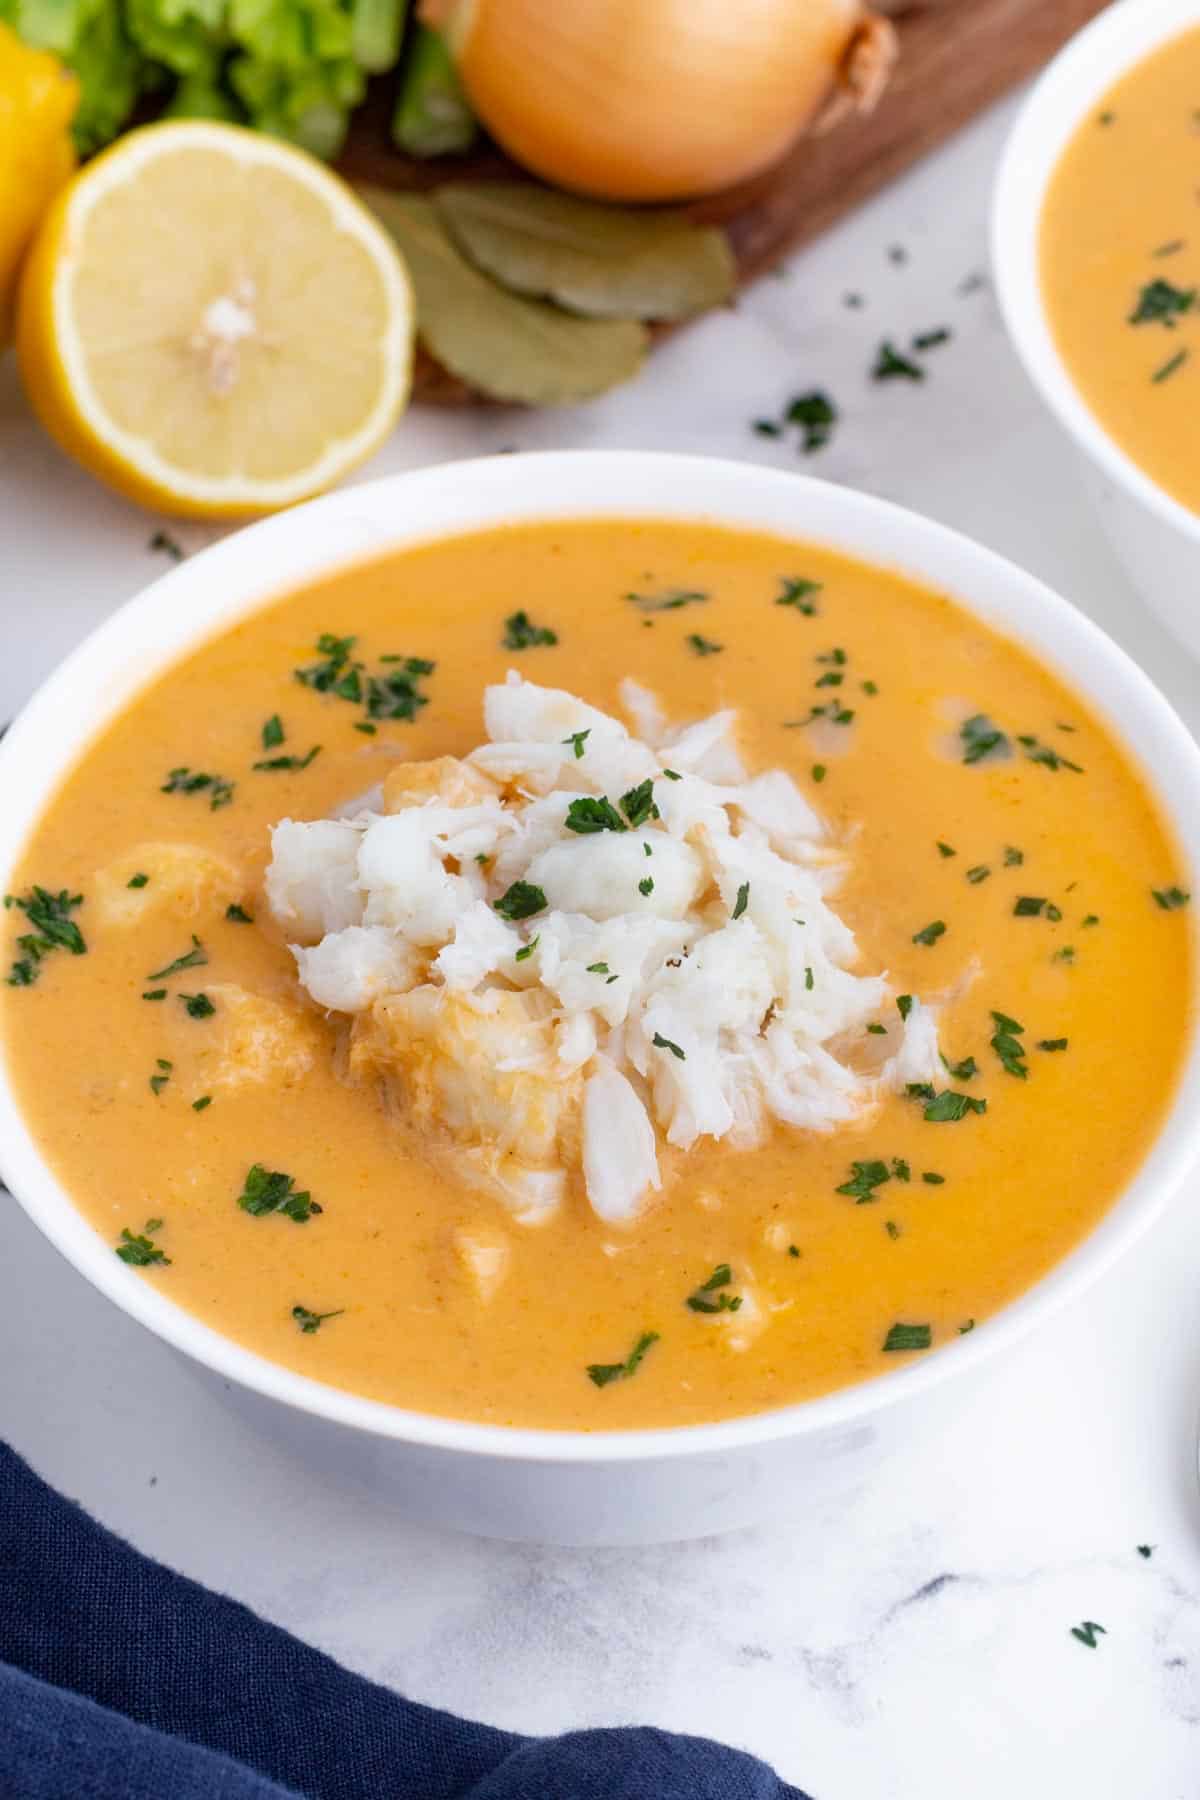 Crab bisque is creamy and delicious.